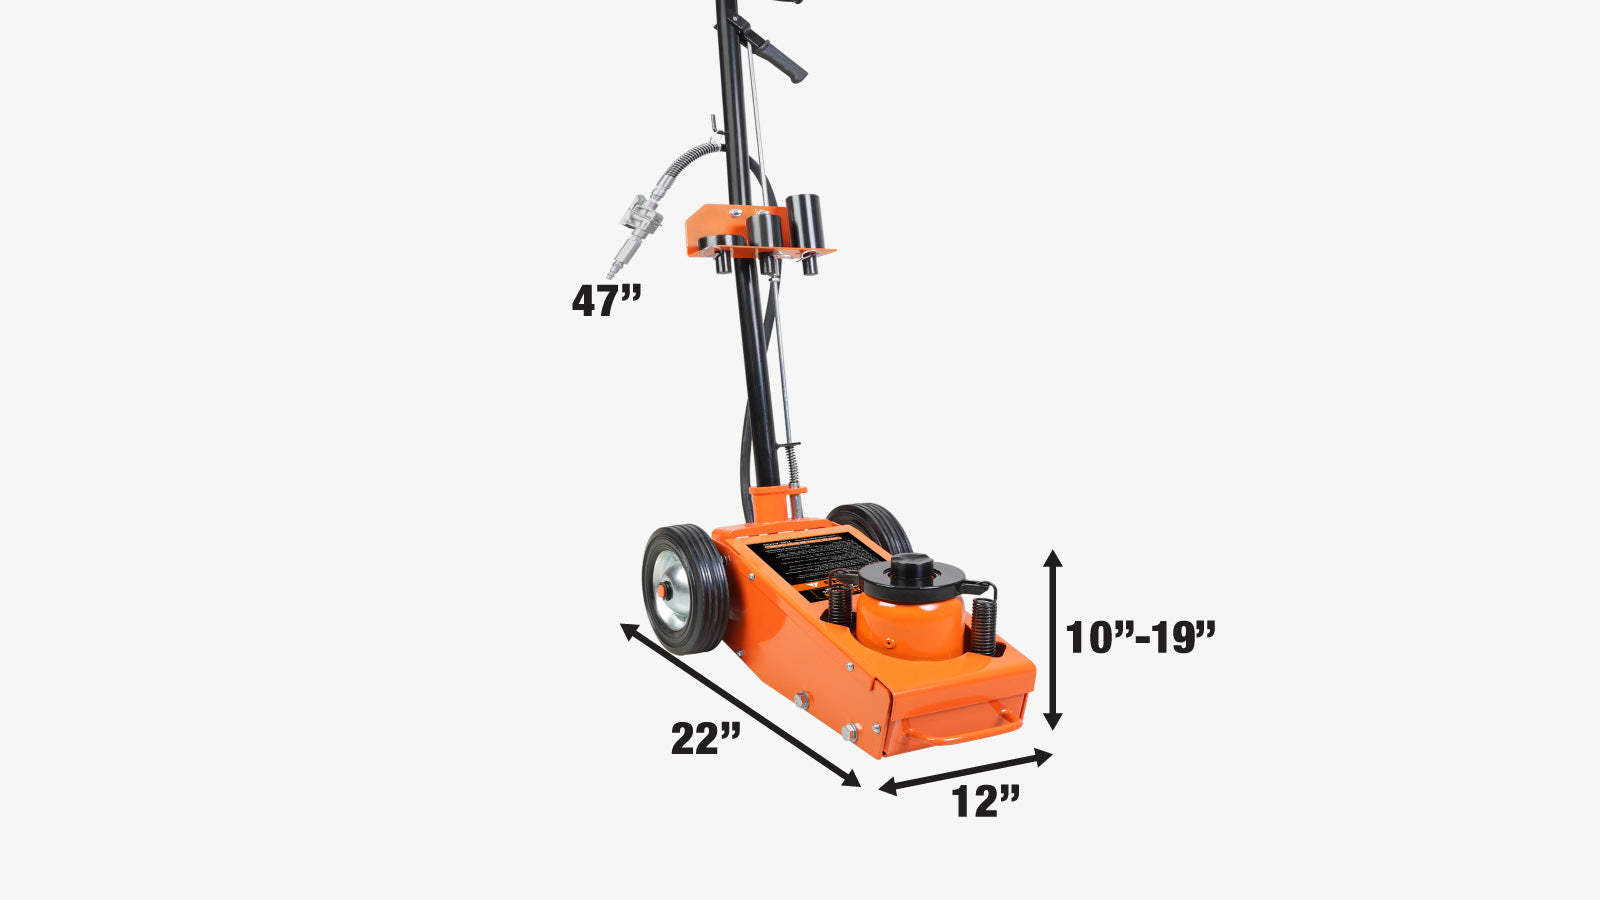 TMG Industrial 35 Ton (77,000 lb) Professional Air Hydraulic Axle Jack, Pneumatic Control, Double Springs, 19” Lift Height, TMG-AJX35-specifications-image